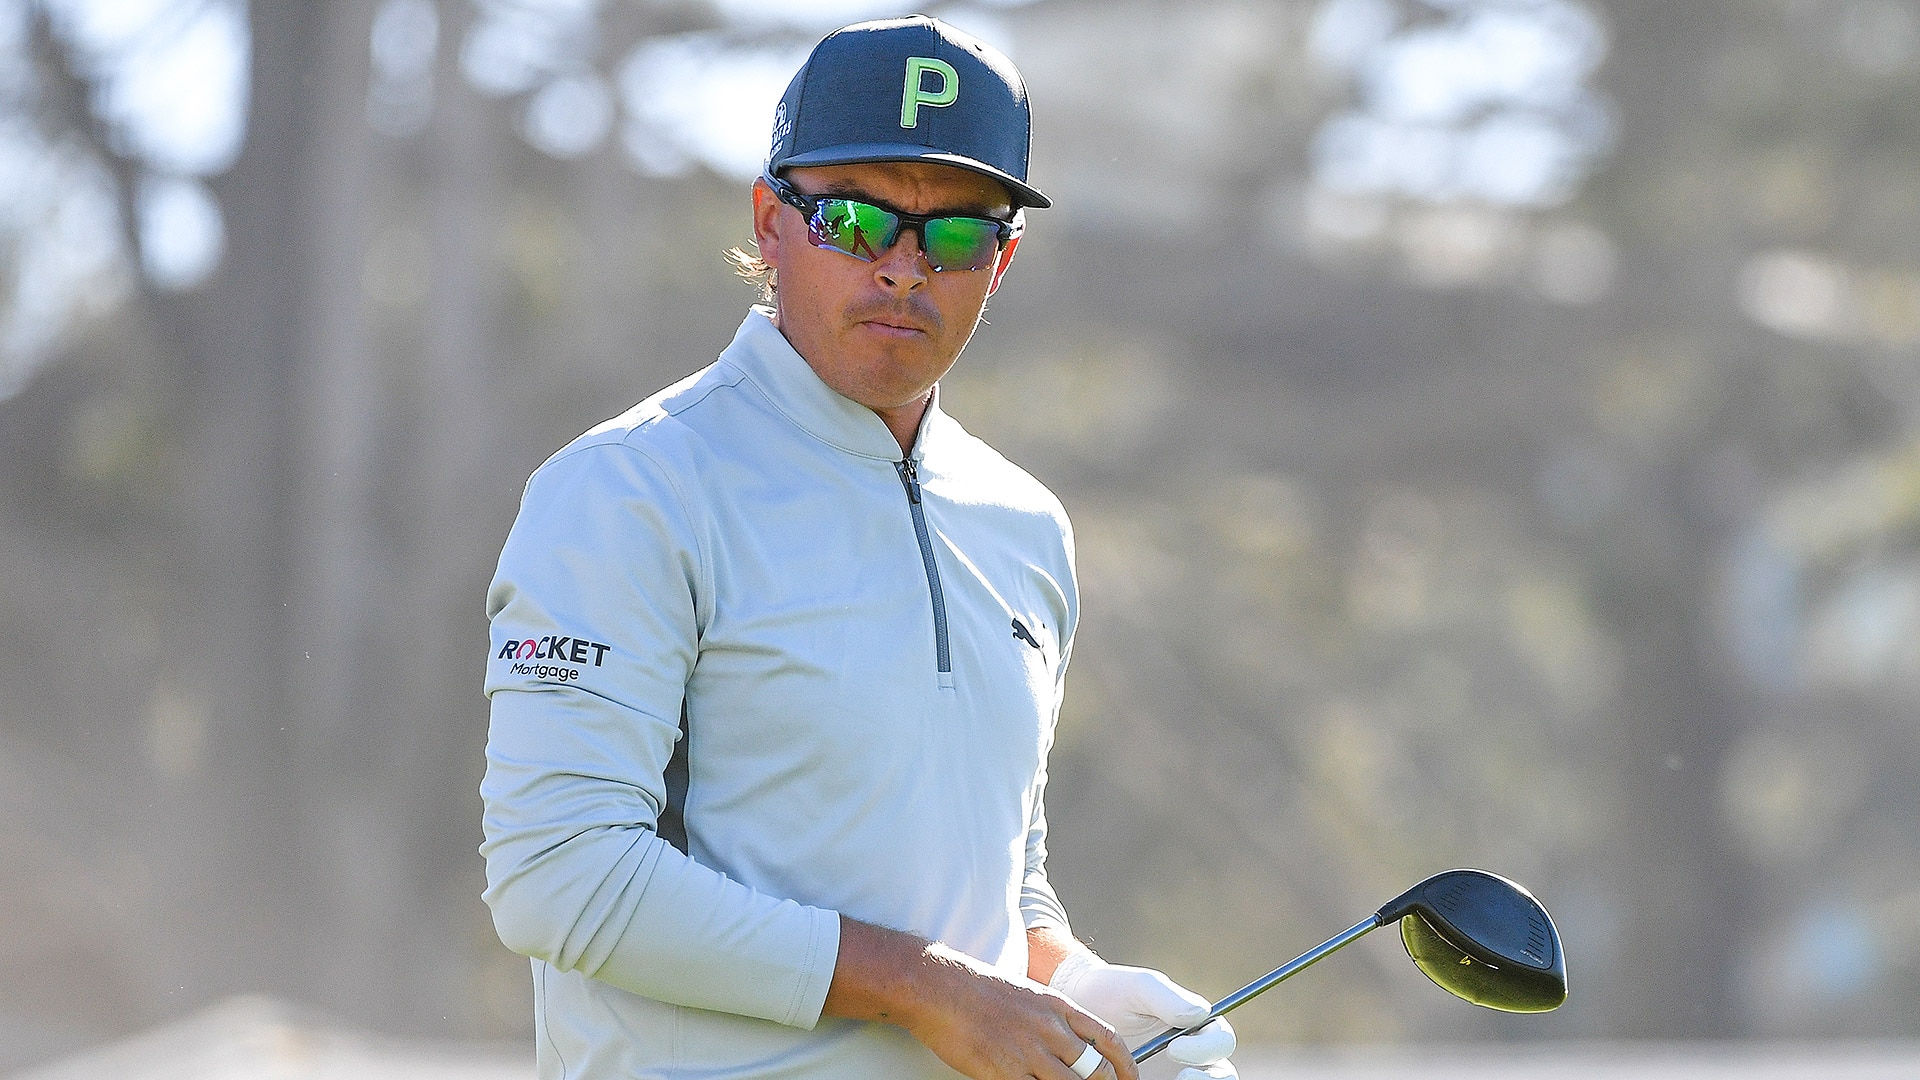 With new swing thought, a 'more deliberate' Rickie Fowler shoots 66 2